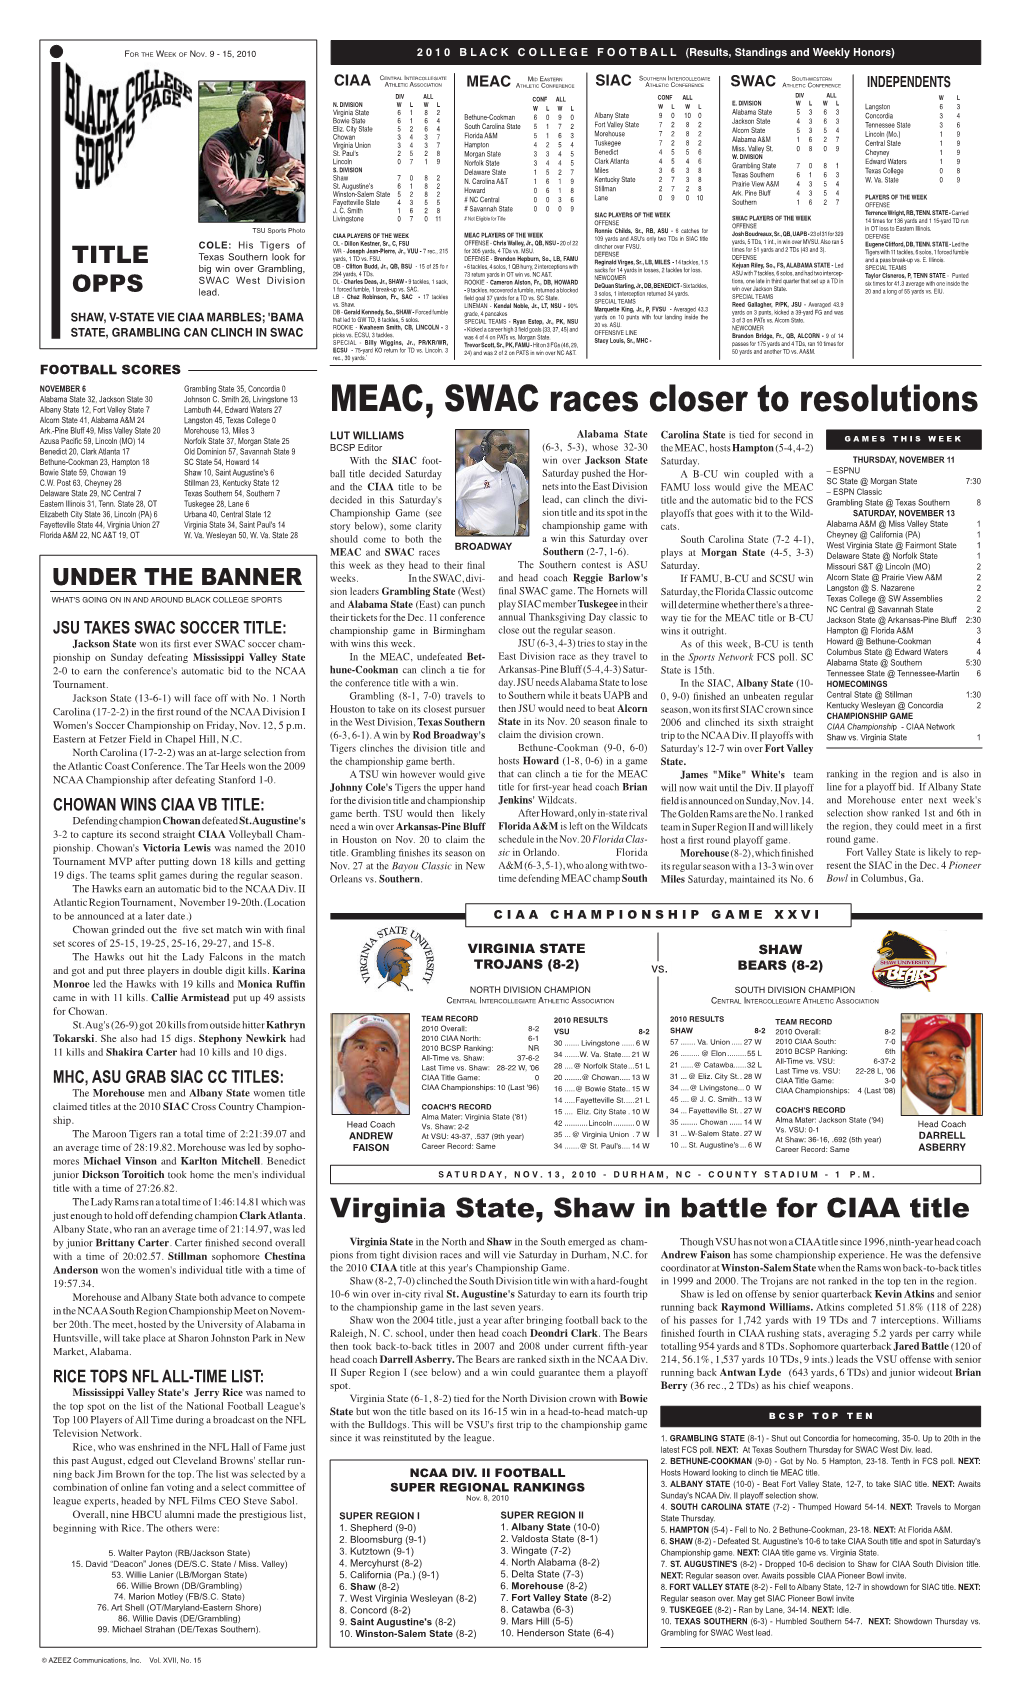 MEAC, SWAC Races Closer to Resolutions